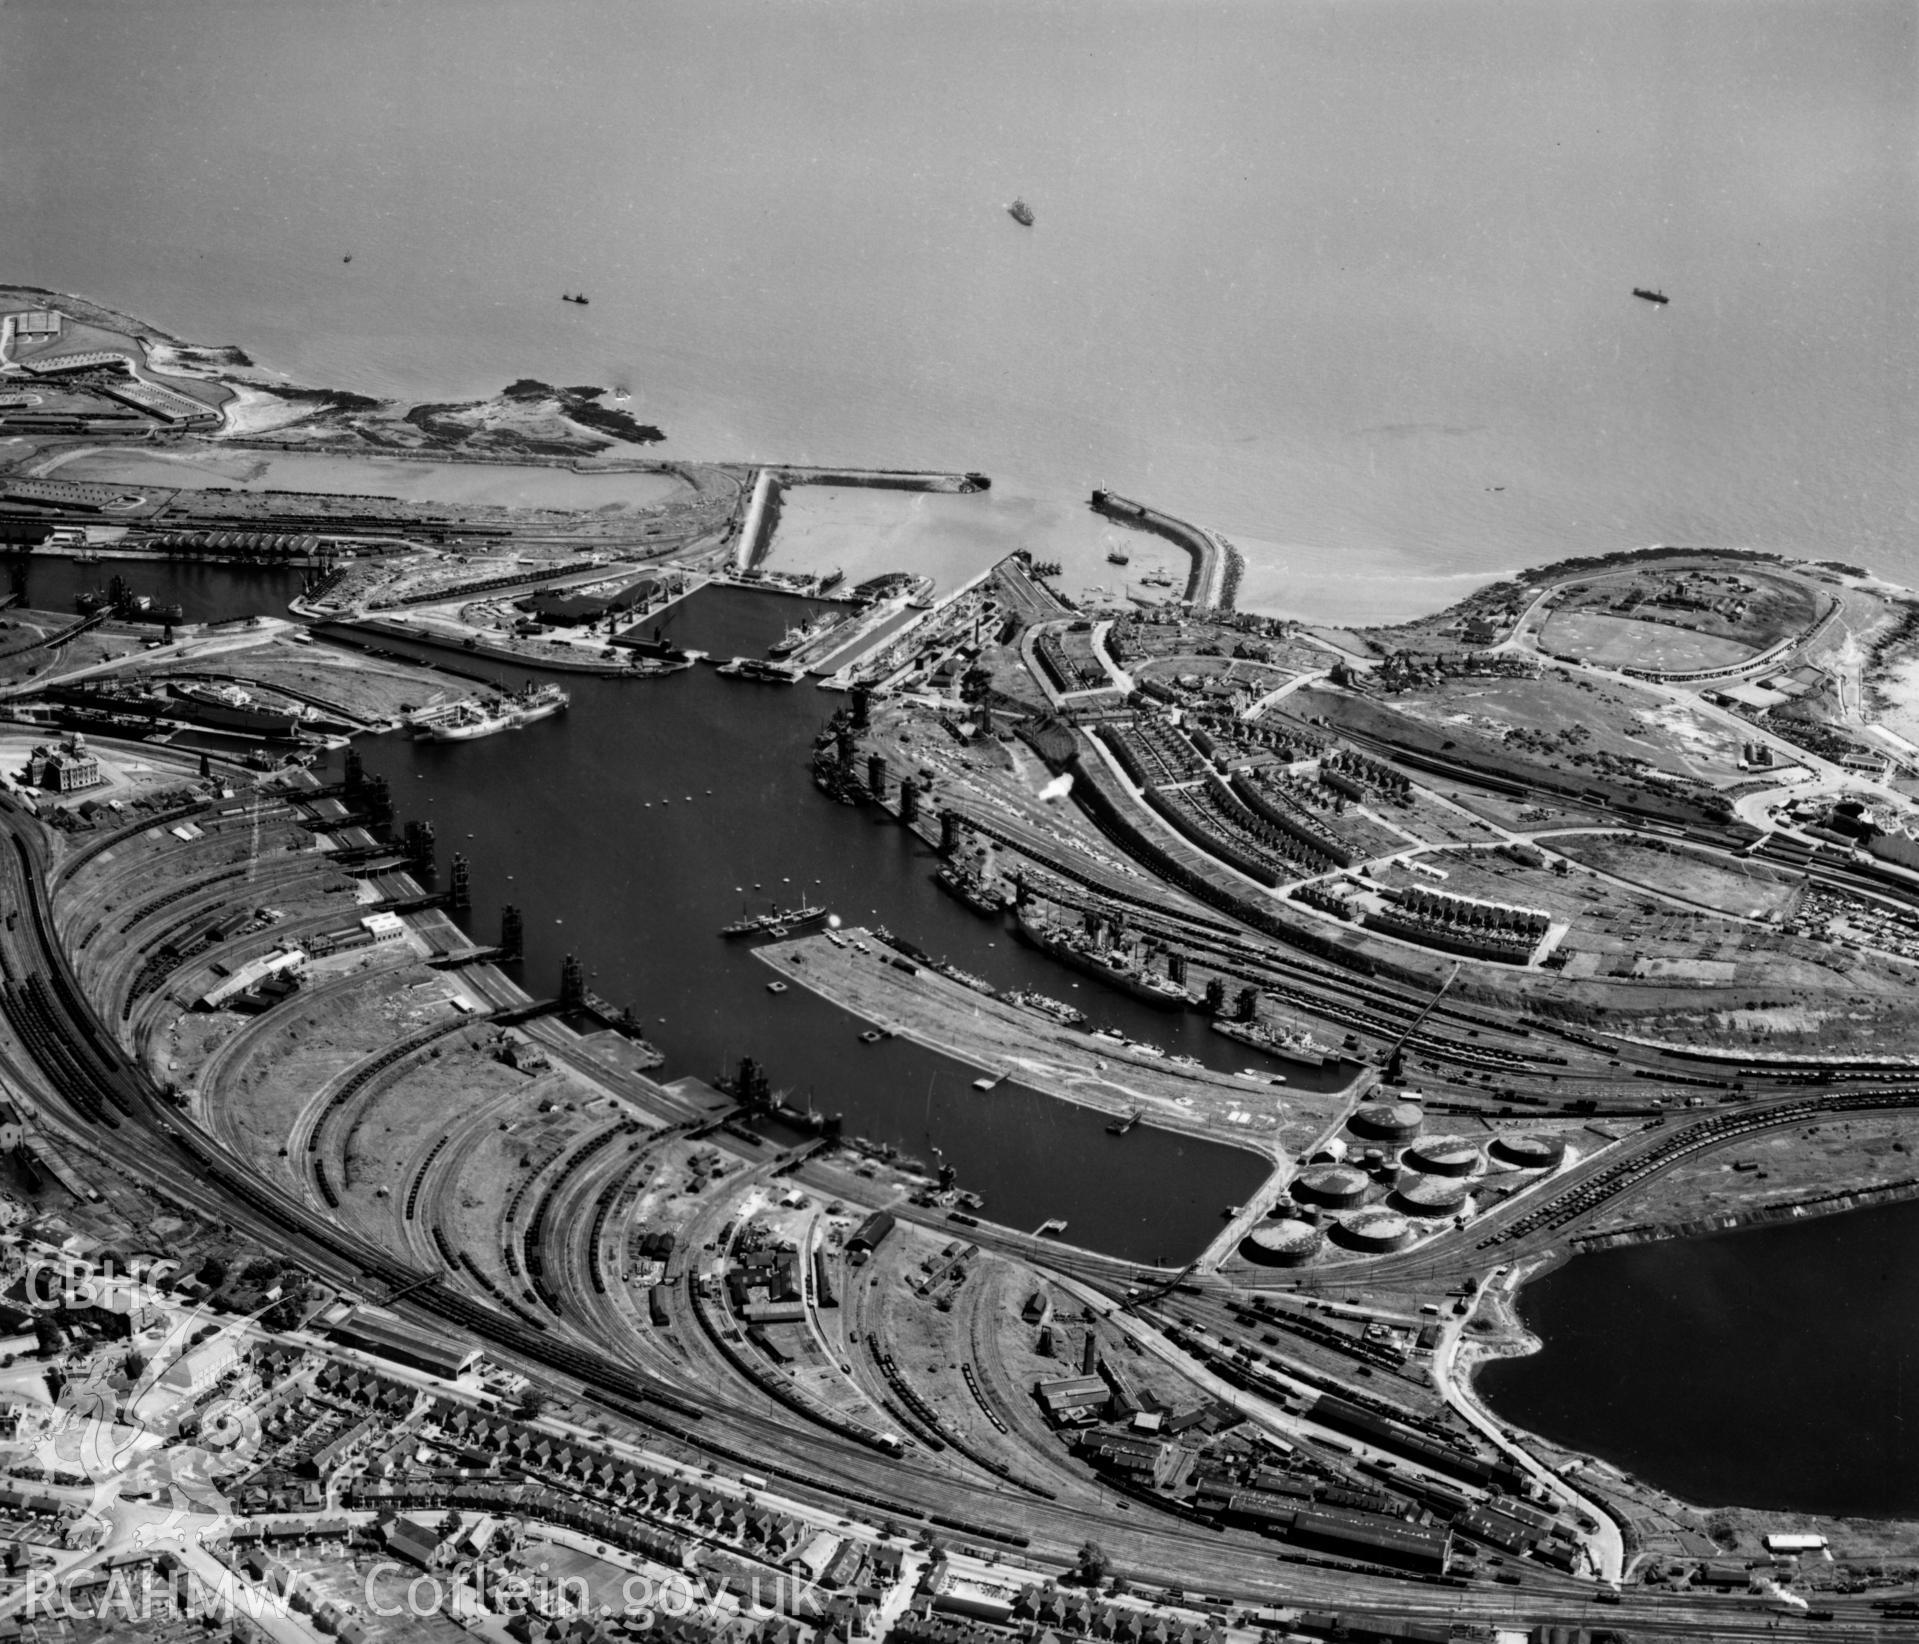 General view of Barry docks with view of signal station and ex-military camp at Barry Island. Oblique aerial photograph, 5?" cut roll film.